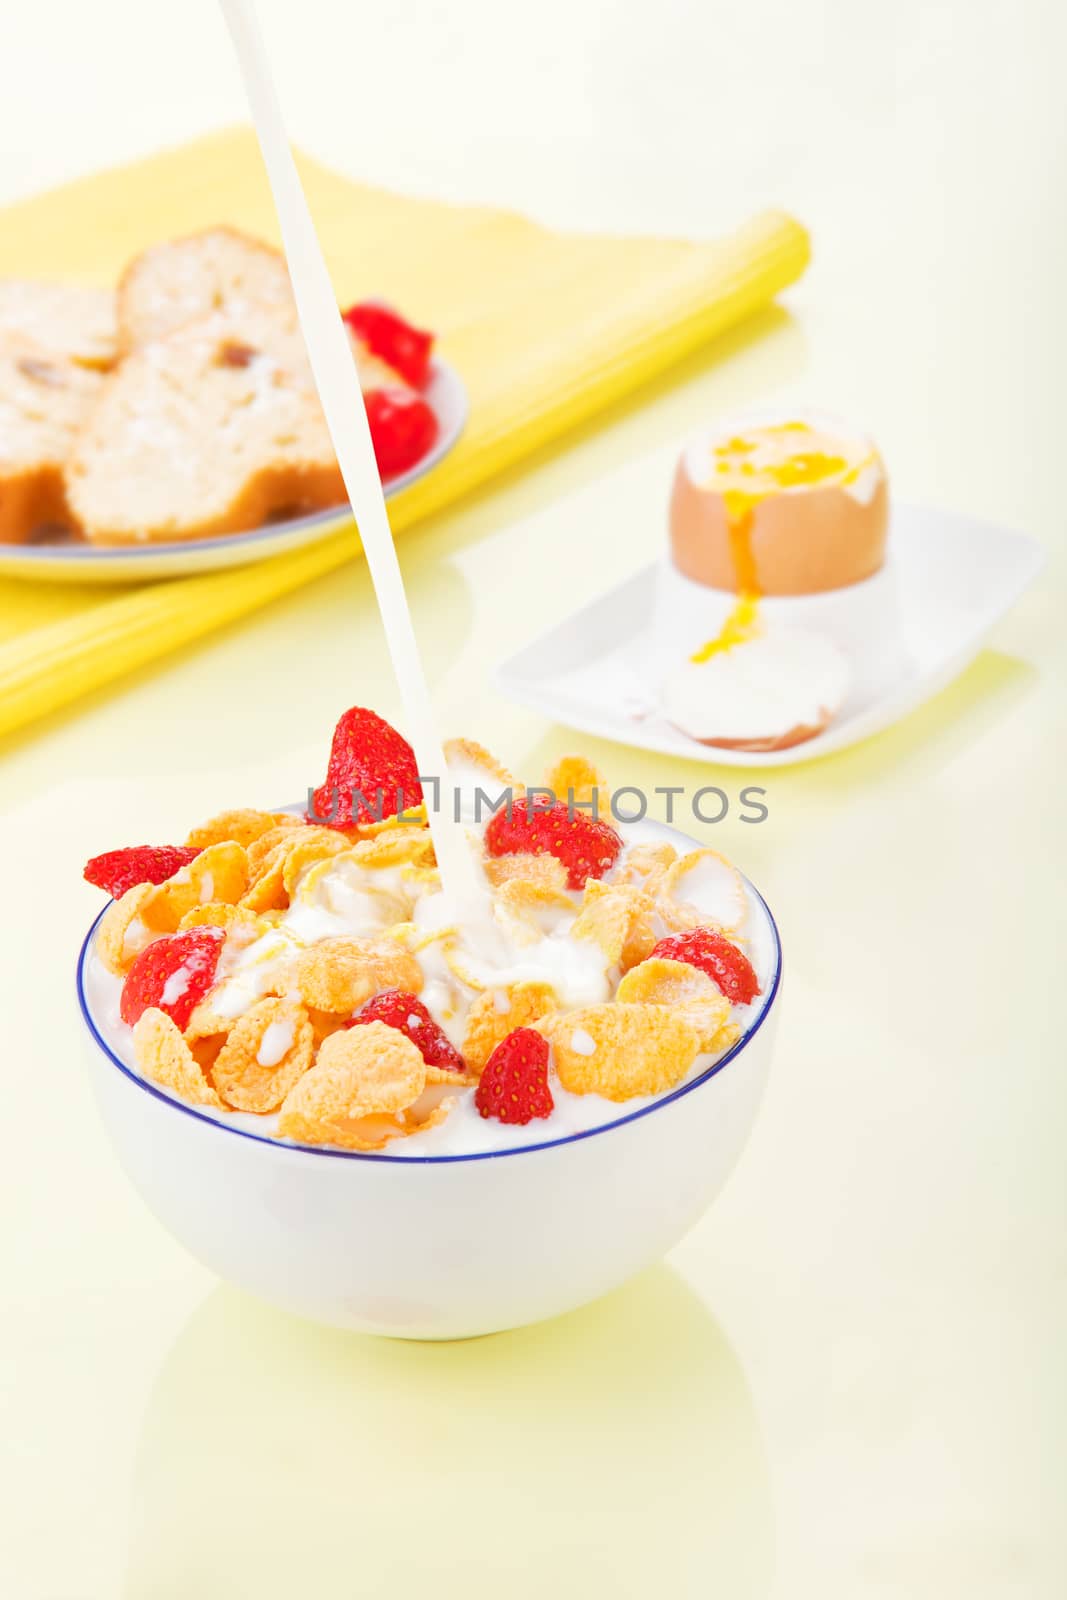 Pouring milk into a bowl with corn flakes and strawberries. Delicious breakfast. Egg and pastry in background.